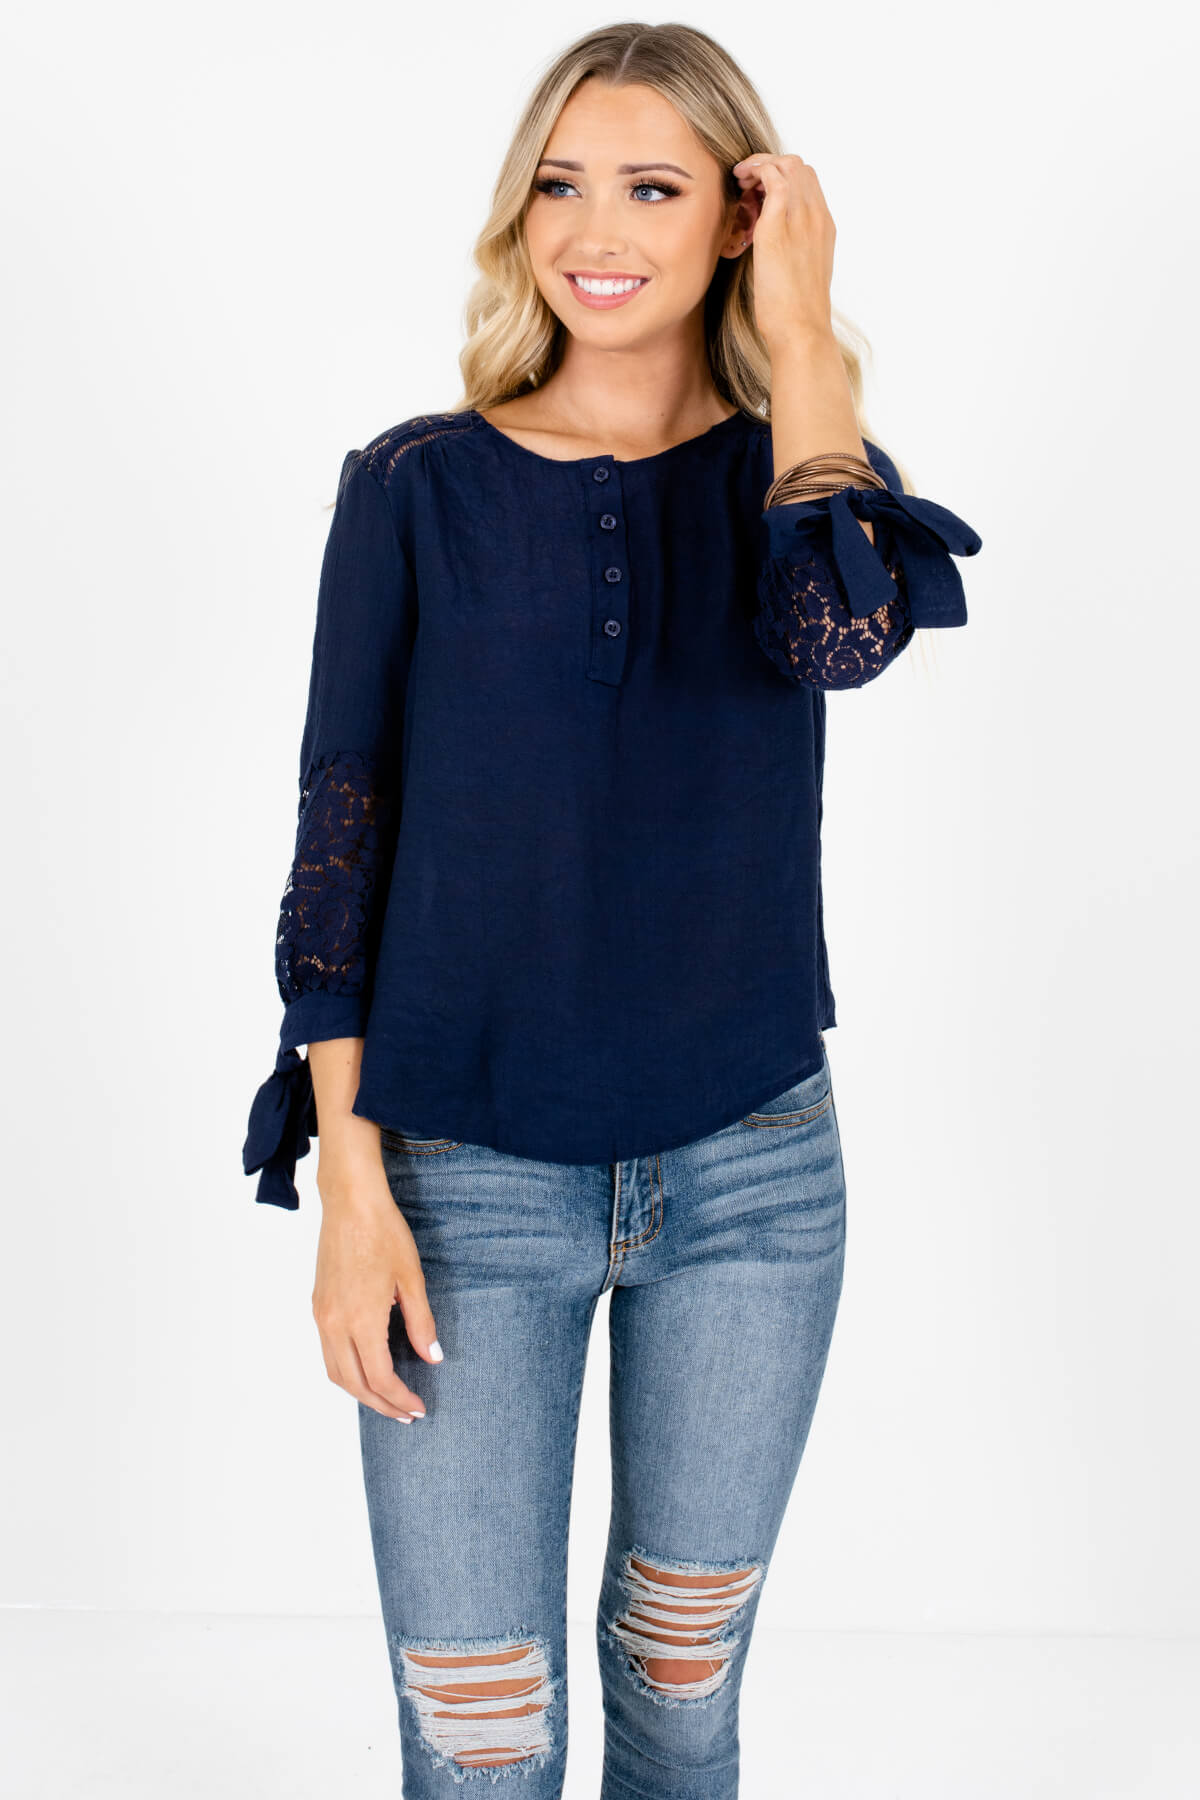 Navy Blue Crochet Lace 3/4 Sleeve Tops Affordable Online Boutique